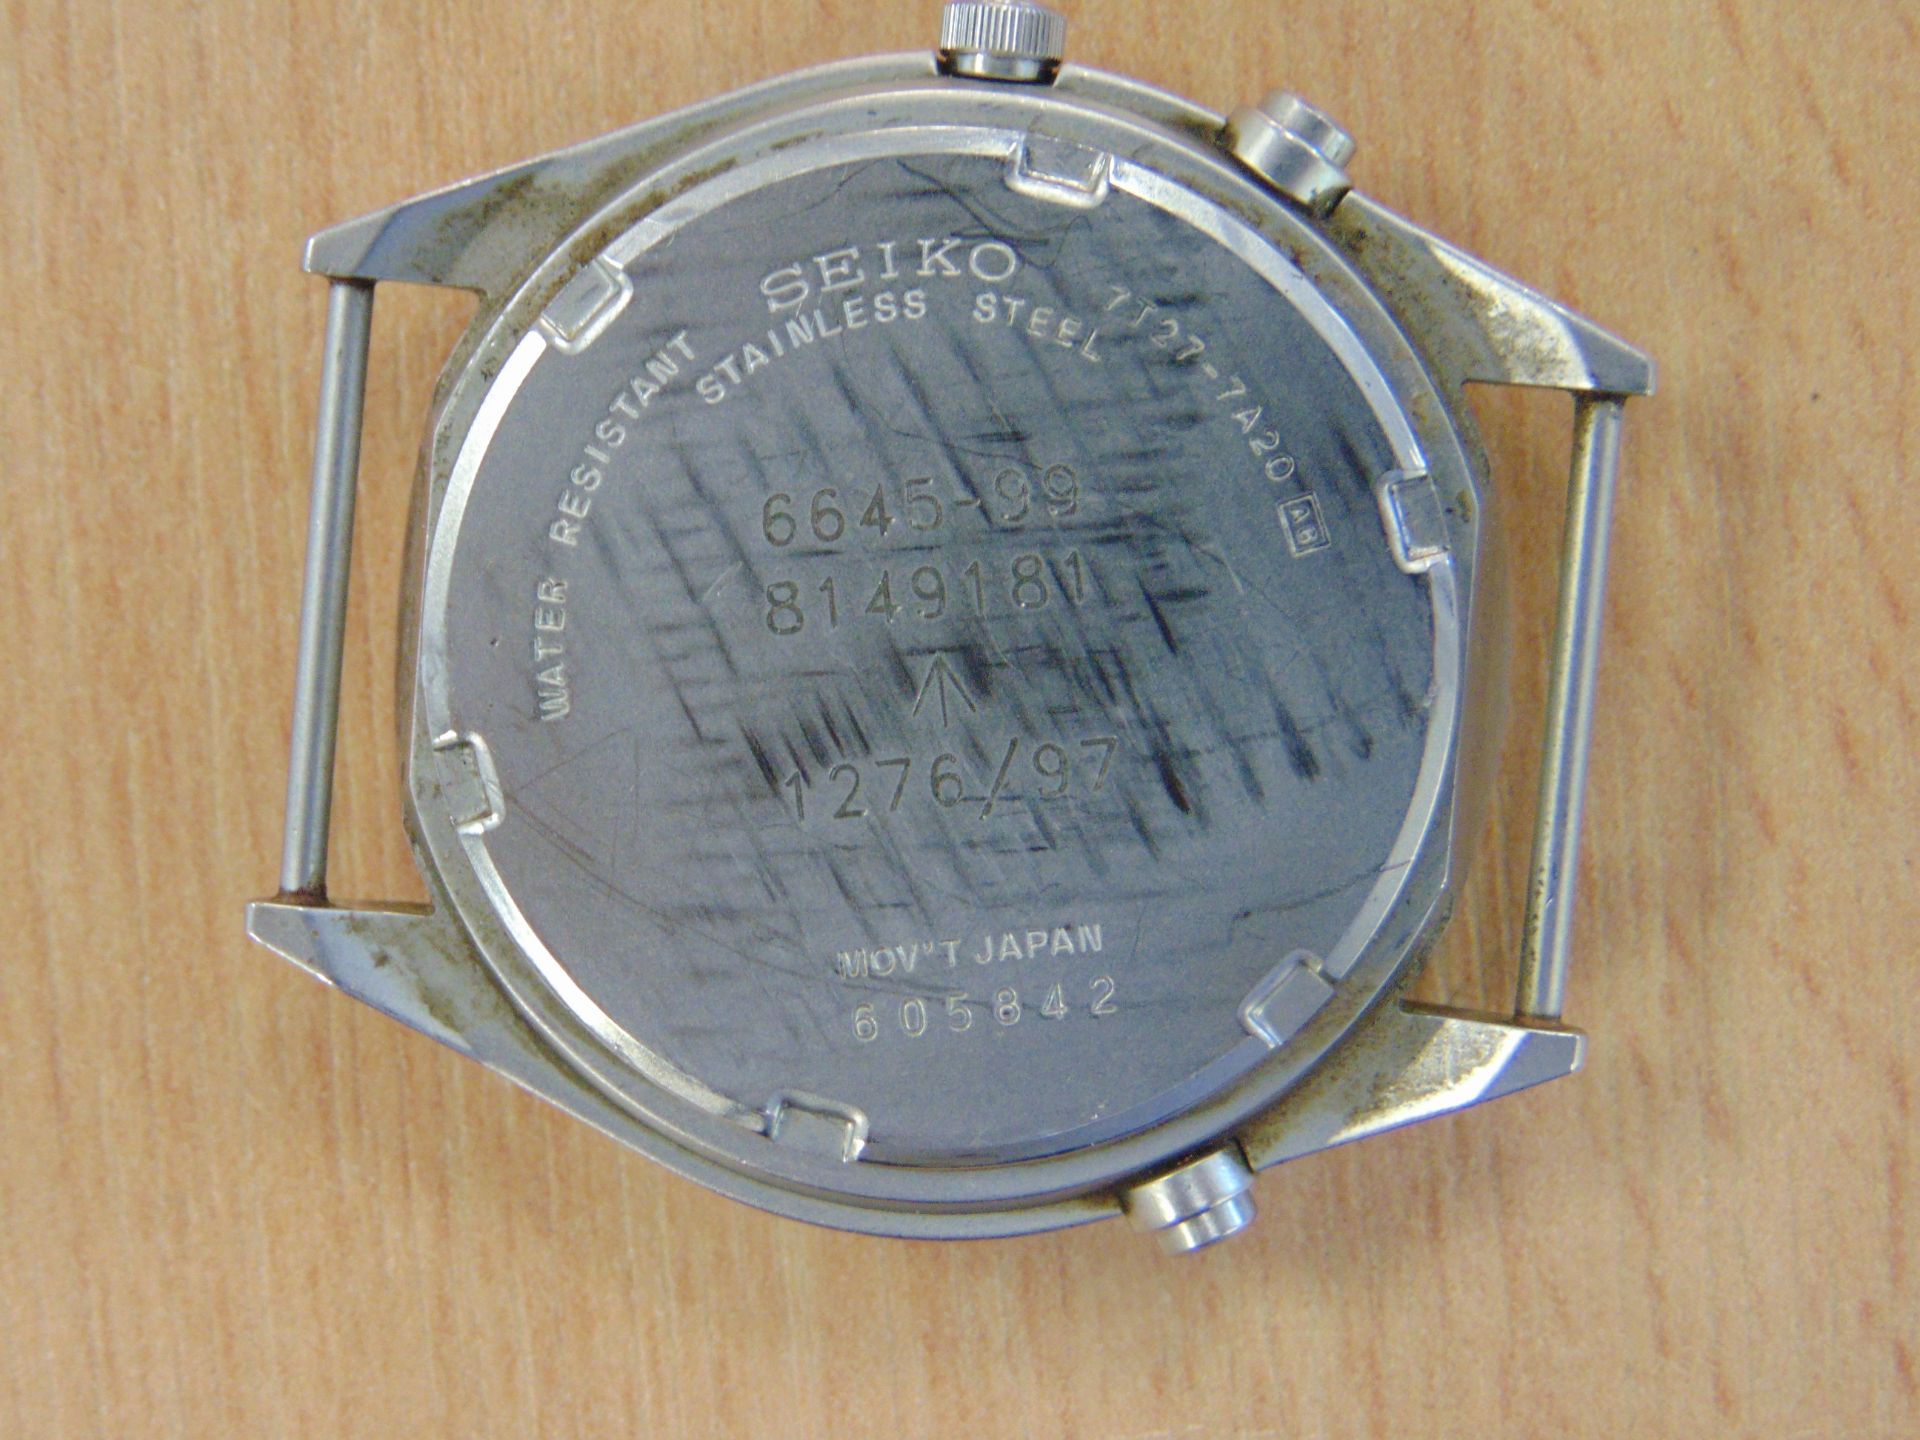 SEIKO GEN 2 RAF ISSUE PILOTS CHRONO WATCH NATO MARKINGS DATED 1997 - Image 7 of 9